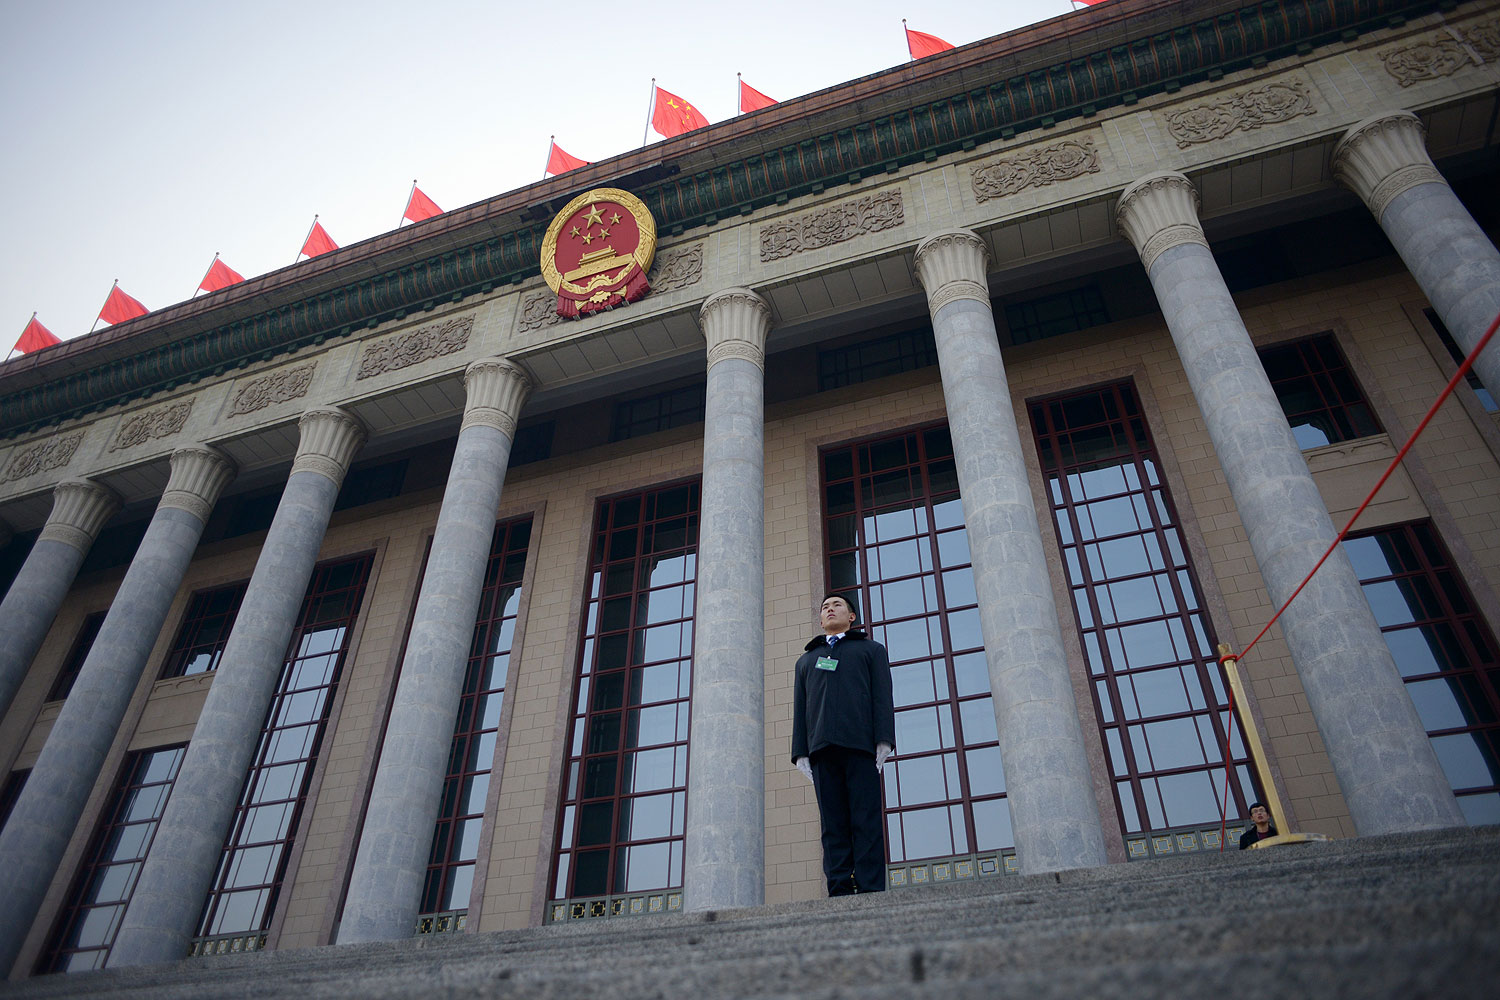 A security guard stands in front of The Great Hall of the People before the upcoming opening sessions of the National People's Congress (NPC) in Beijing on Mar. 2, 2014 (Wang Zhao / AFP / Getty Images)